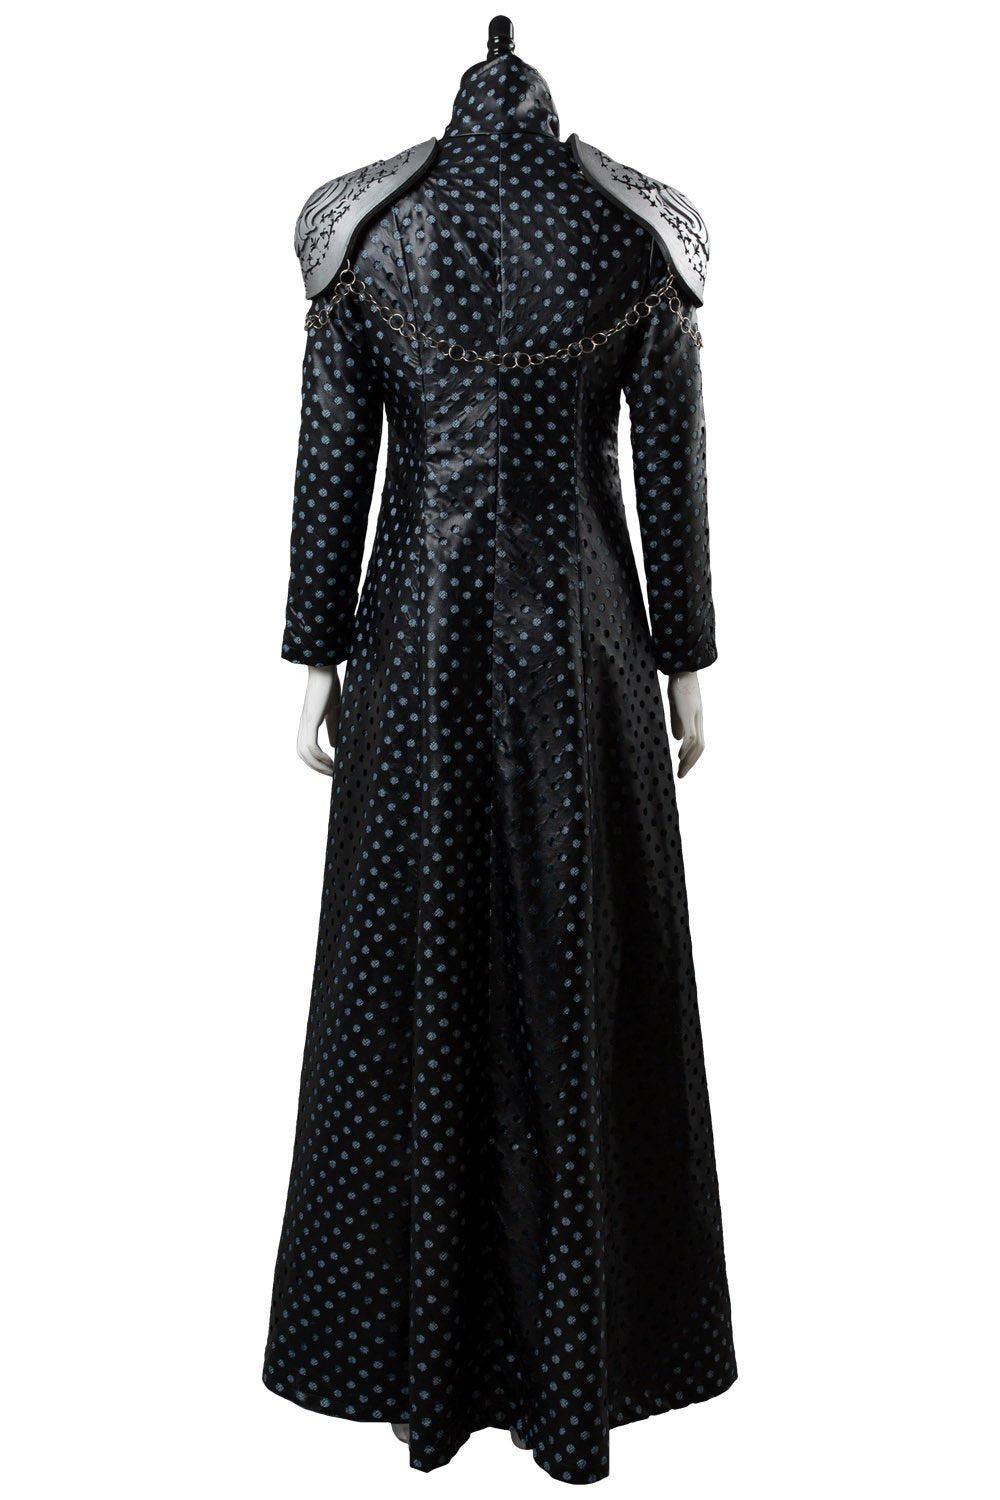 Game of Thrones 7 GOT Cersei Lannister Cosplay Costume